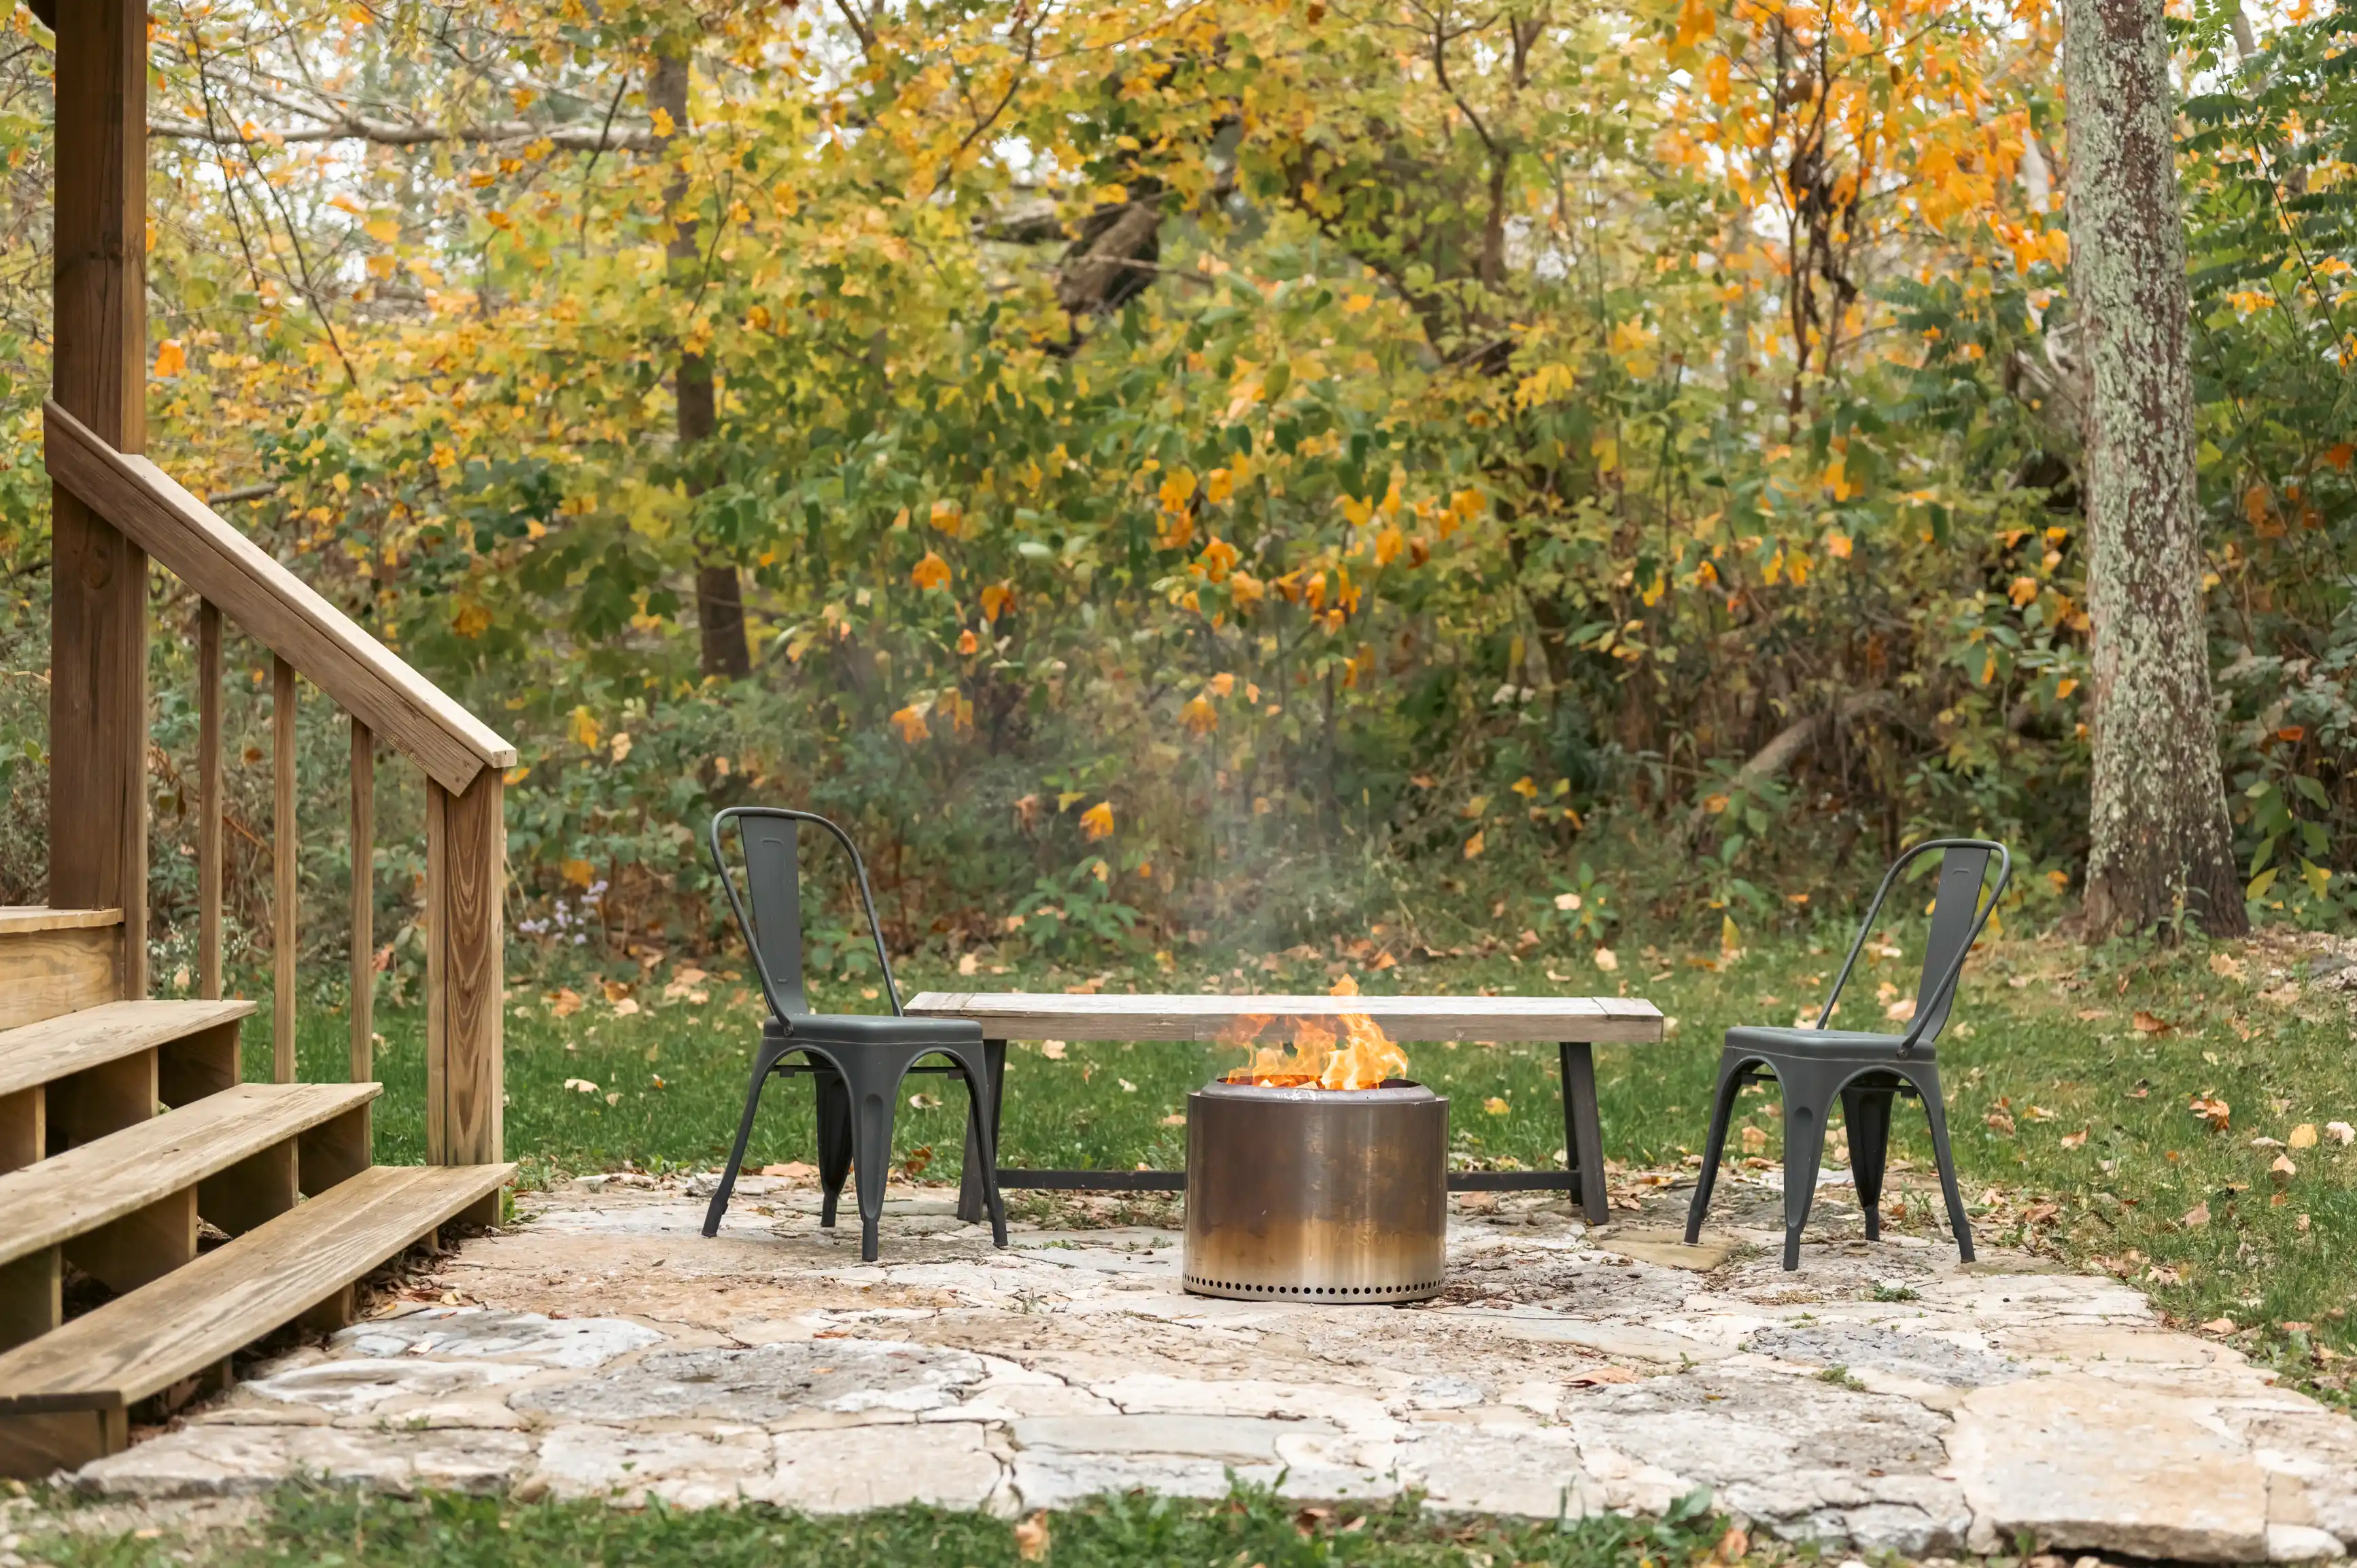 Cozy backyard setting with fire pit ablaze and two chairs by a wooden table on a flagstone patio, surrounded by autumn trees.